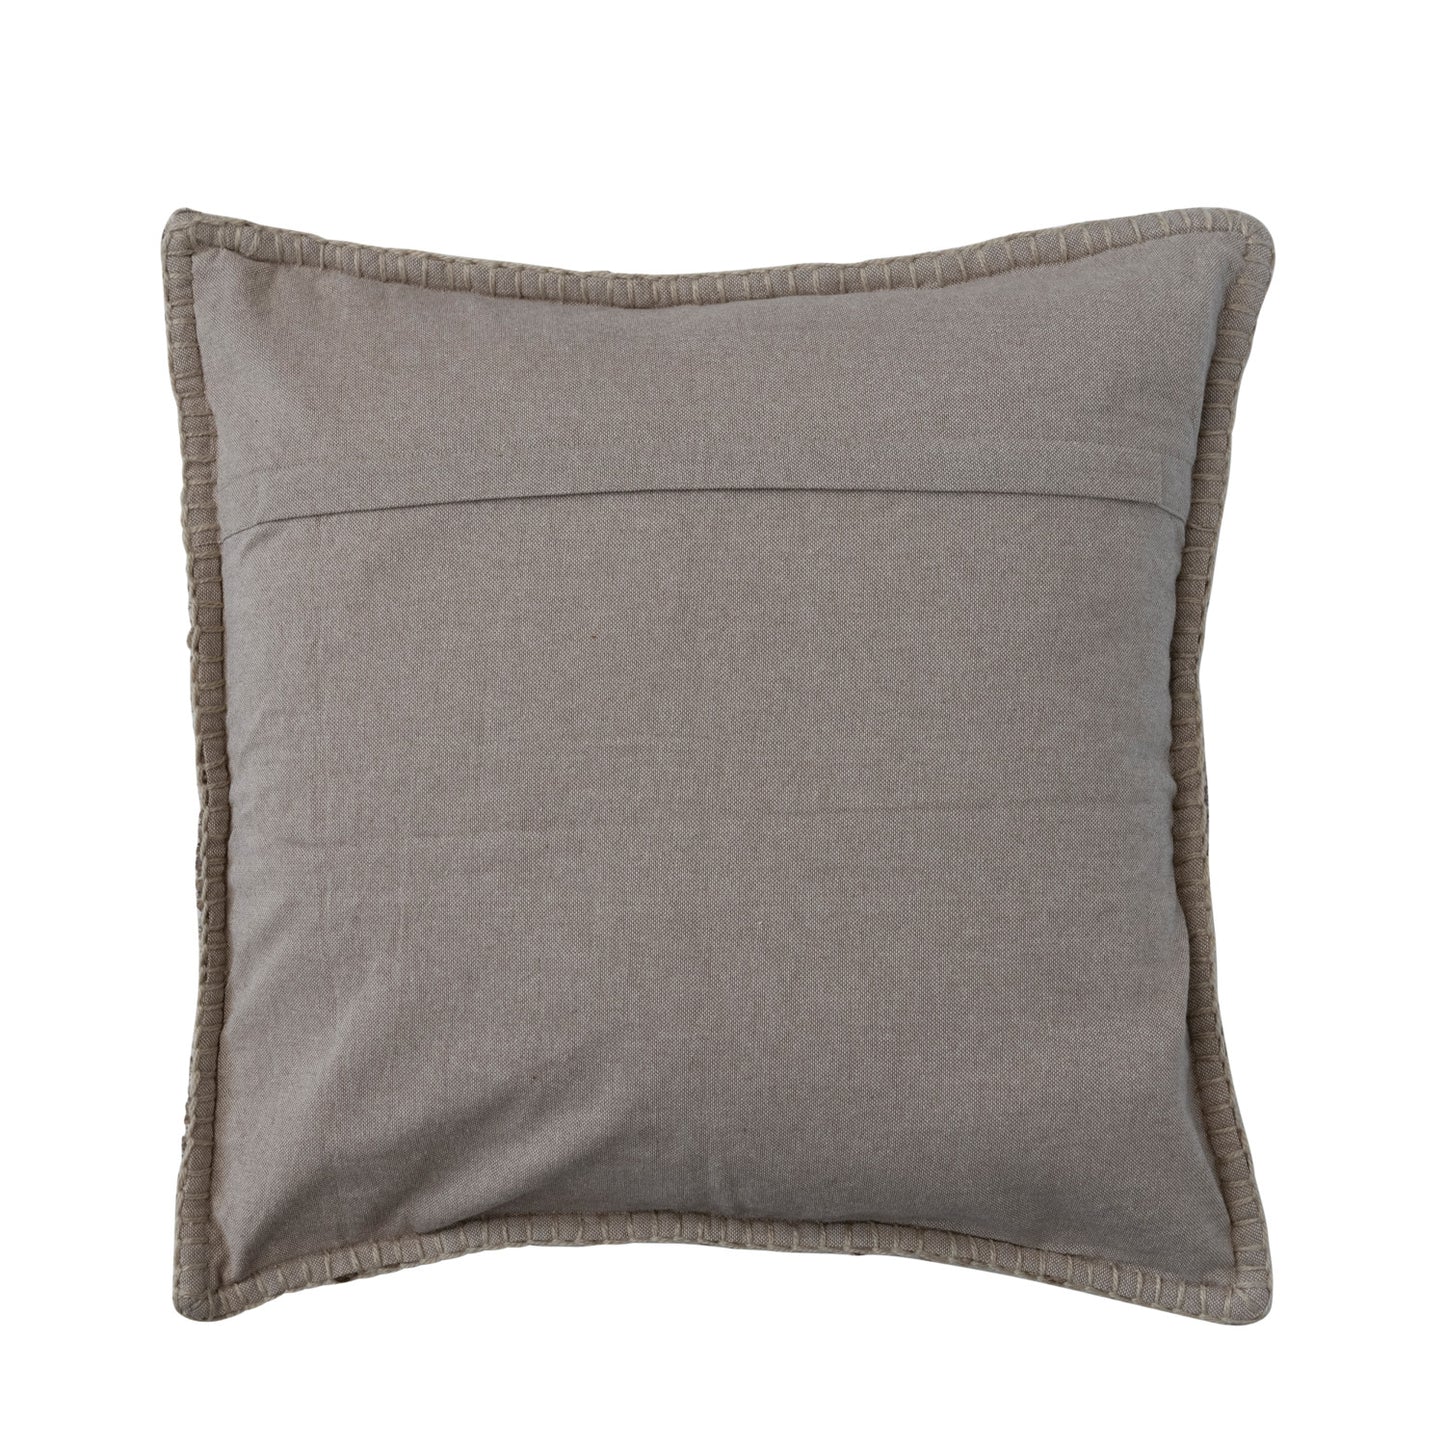 Hand-Woven Recycled Cotton Pillow, Blanket Stitch & Chambray Back, Polyester Fill